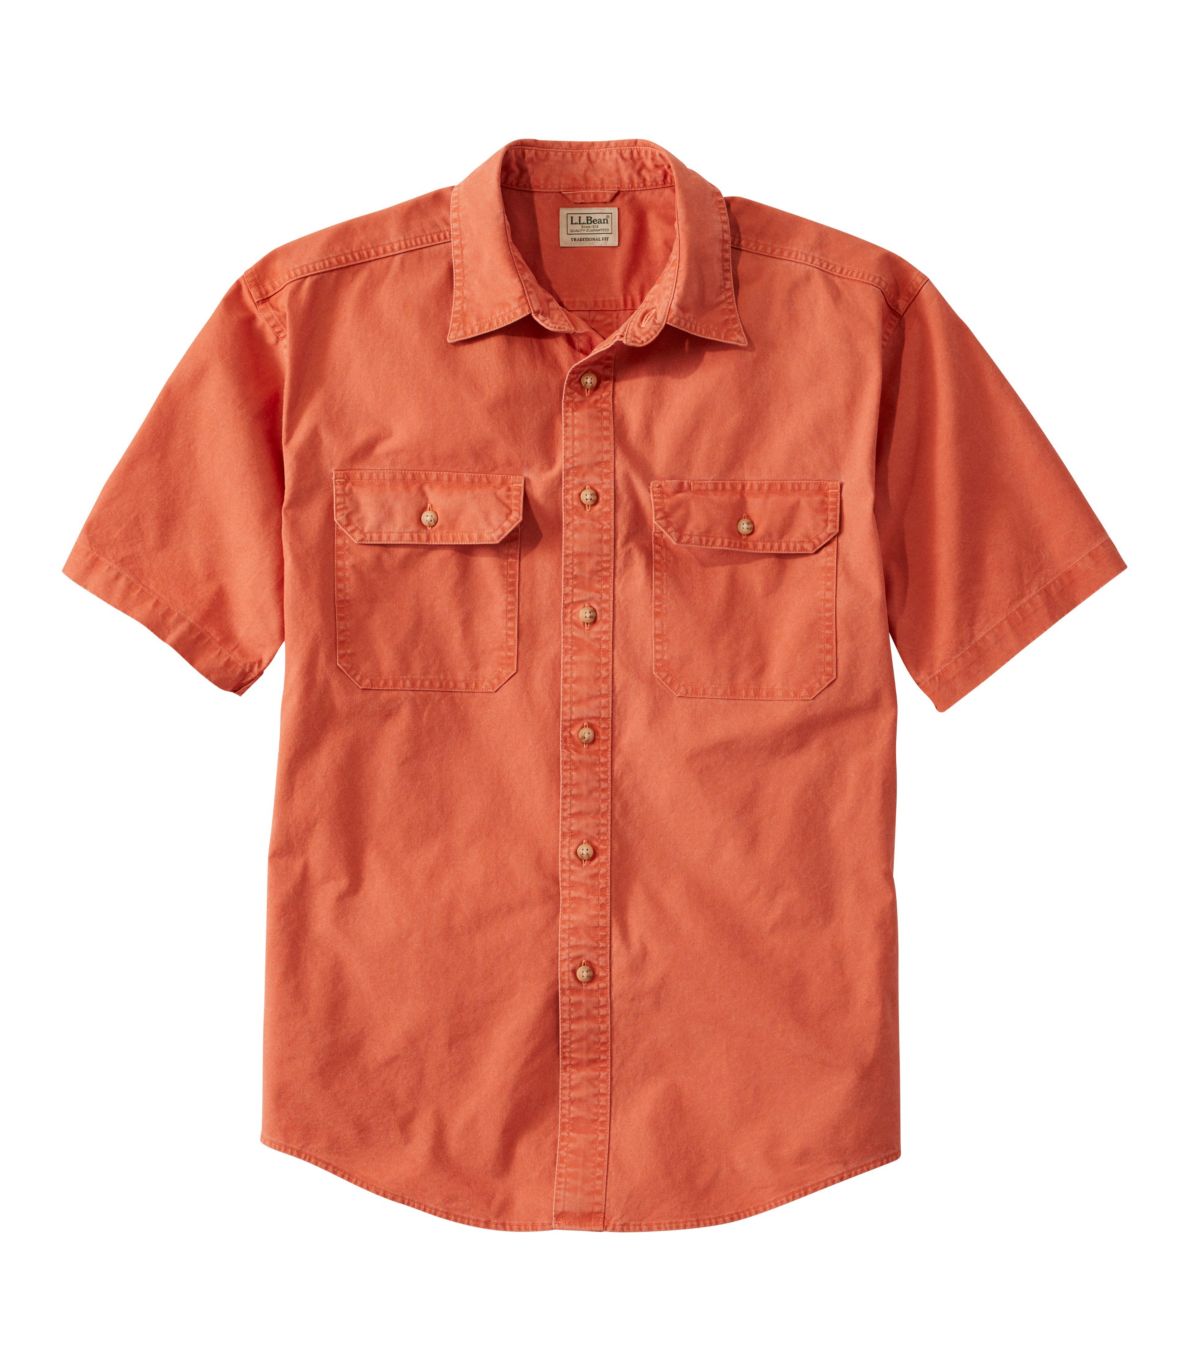 Men's Sunwashed Canvas Shirt, Traditional Fit Short-Sleeve